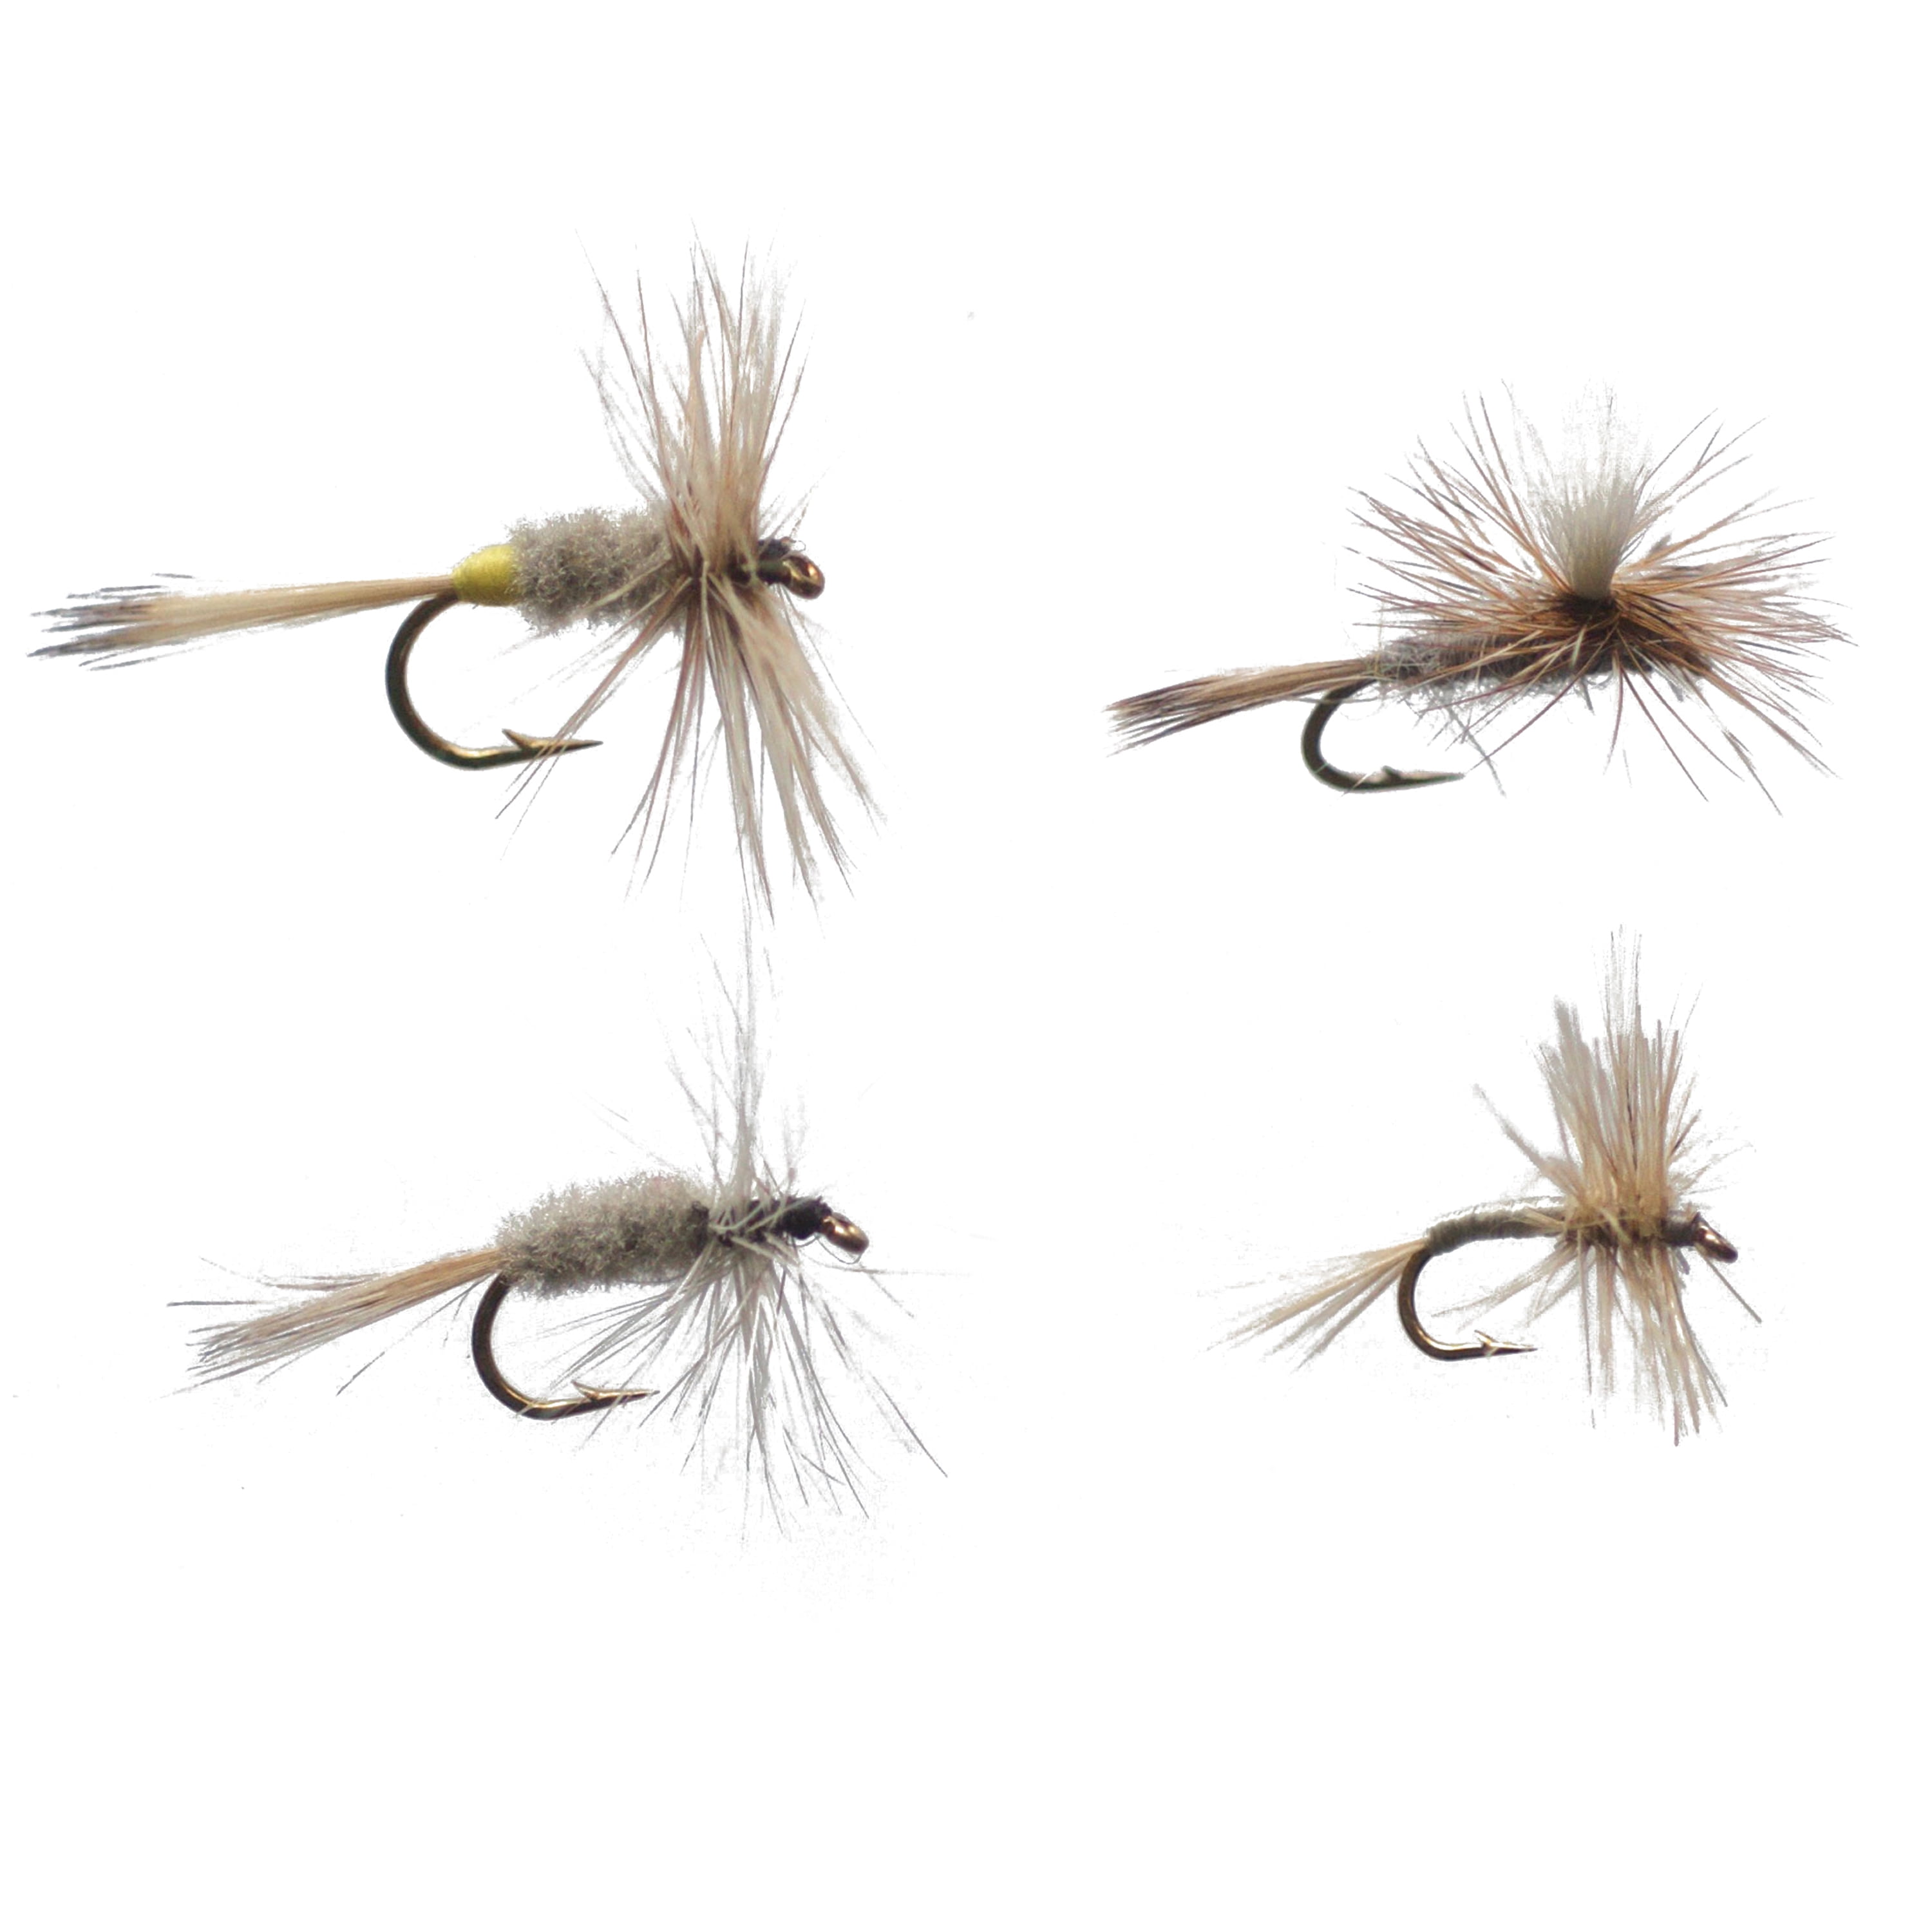 20 In a safe lock box Mixed Sizes Fly Fishing Daddy Long Legs Trout Flies 